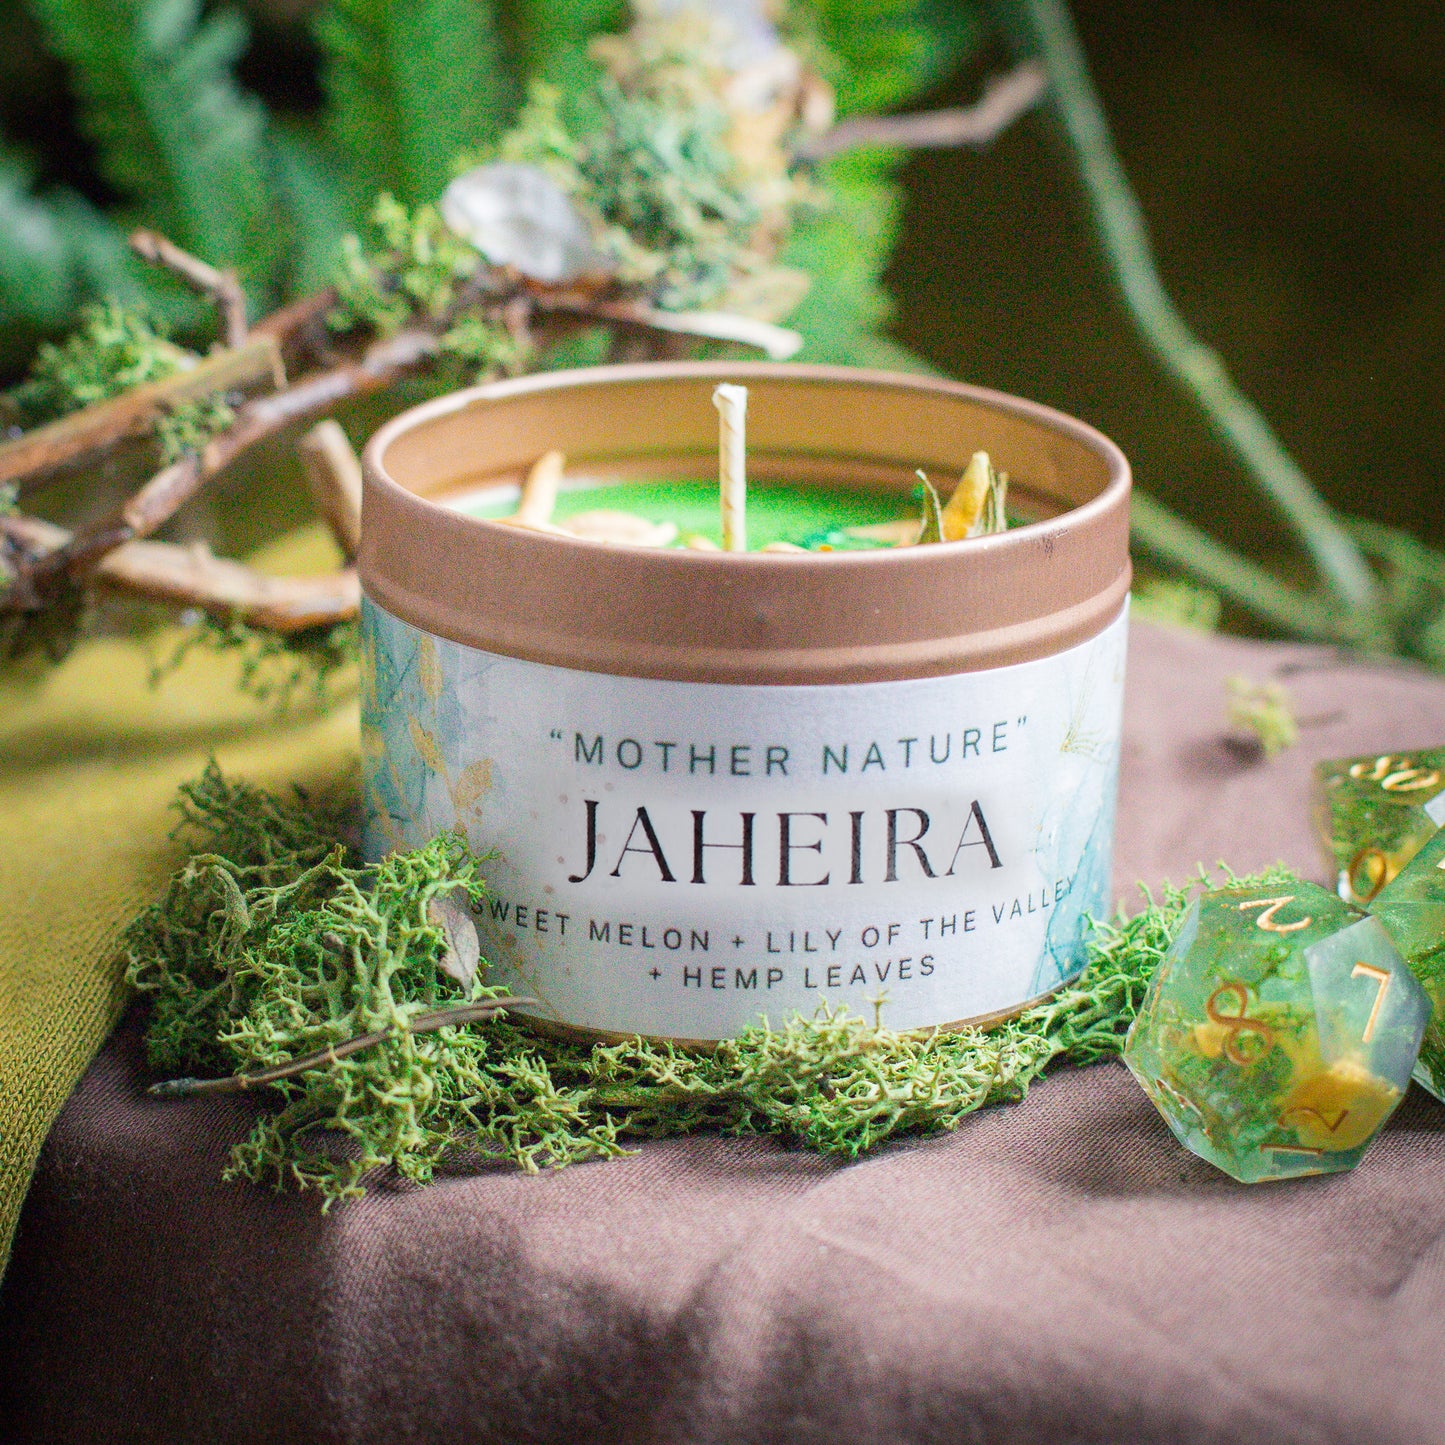 Jaheira inspired candle - 'Mother Nature' Baldurs Gate 3 inspired soy Candles 100 ML